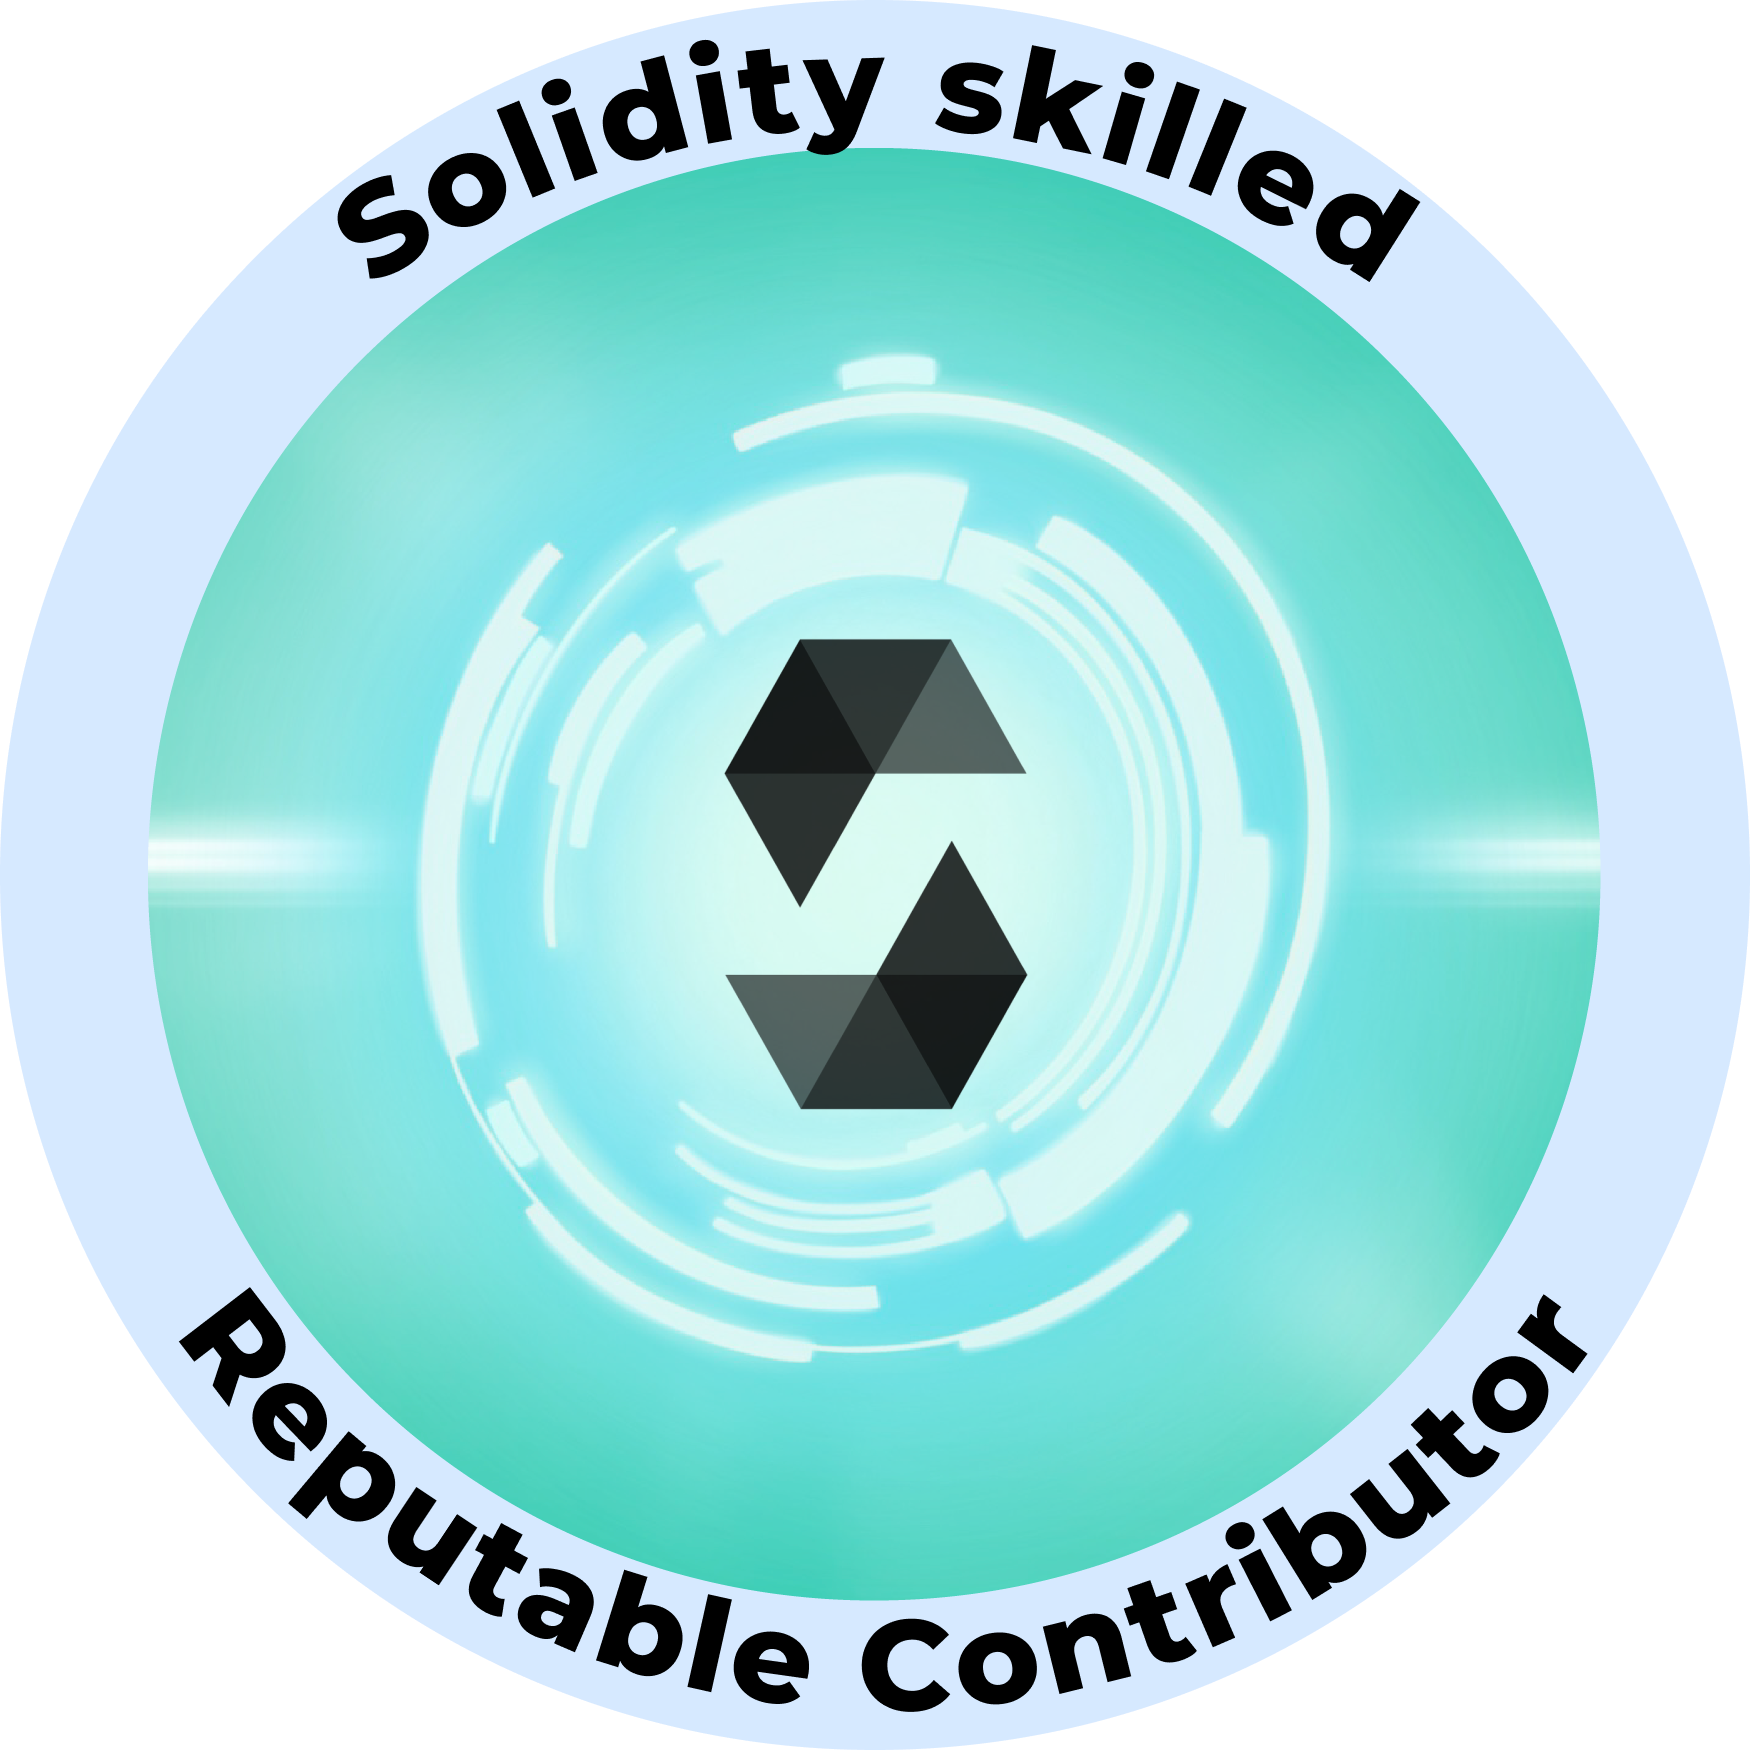 Web3 Badge | Reputable Solidity Skilled Contributor